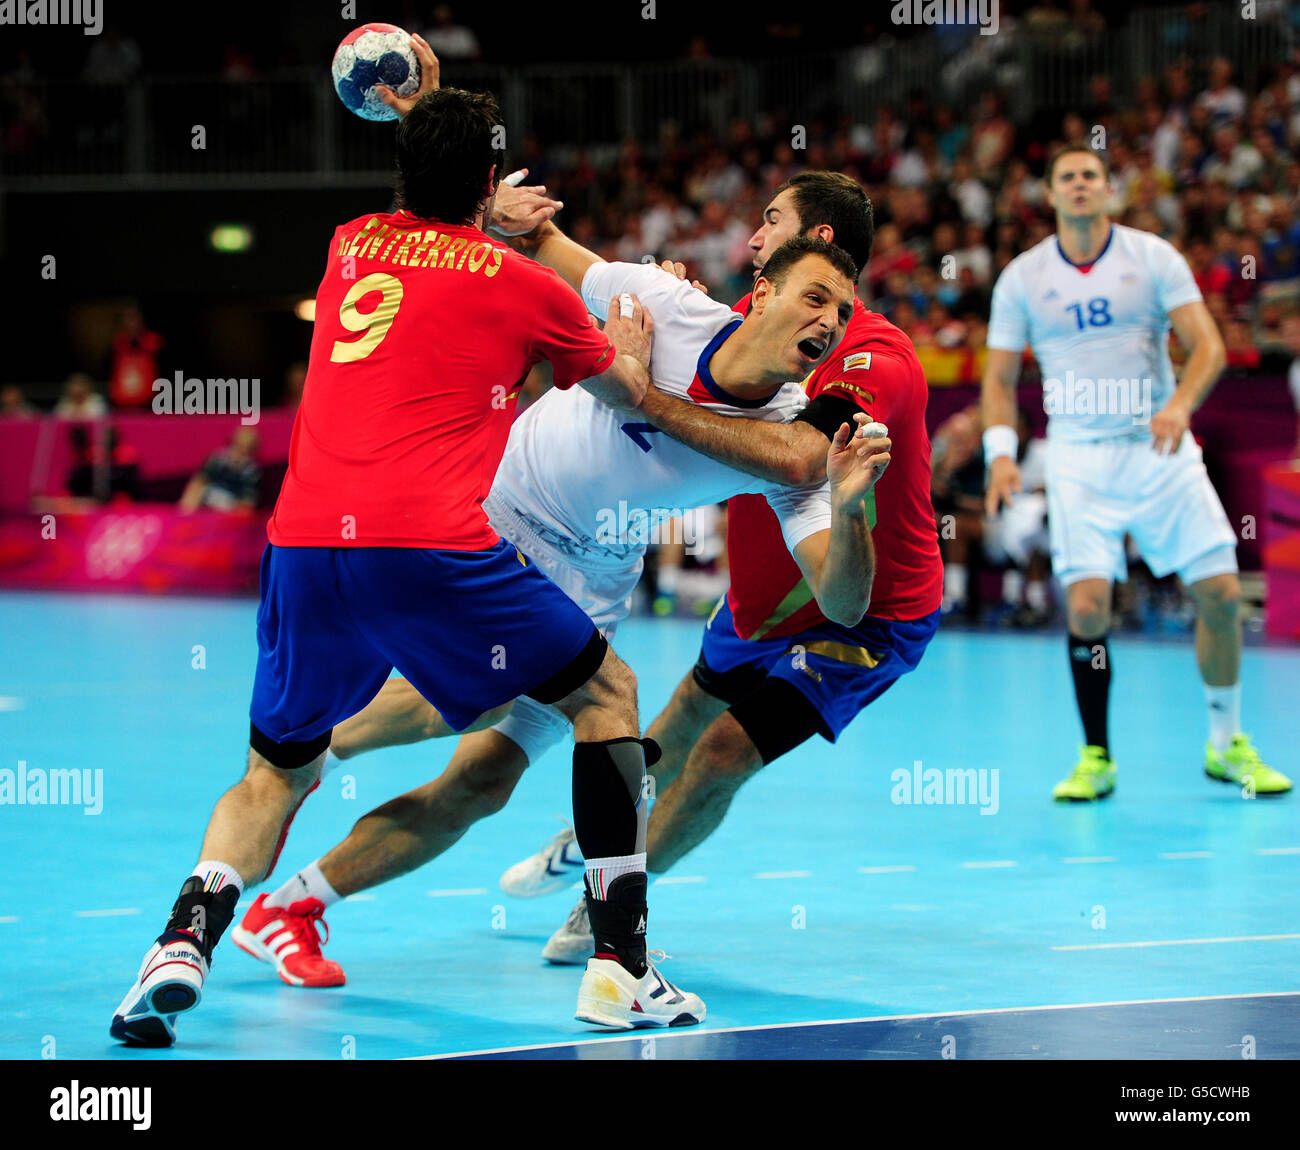 France's Jerome Fernandez (centre) is tackled by Spain's Raul Rodriguez Entrerrios during the Handball Men's Quarterfinal match at the Basketball Arena, Olympic Park. Stock Photo